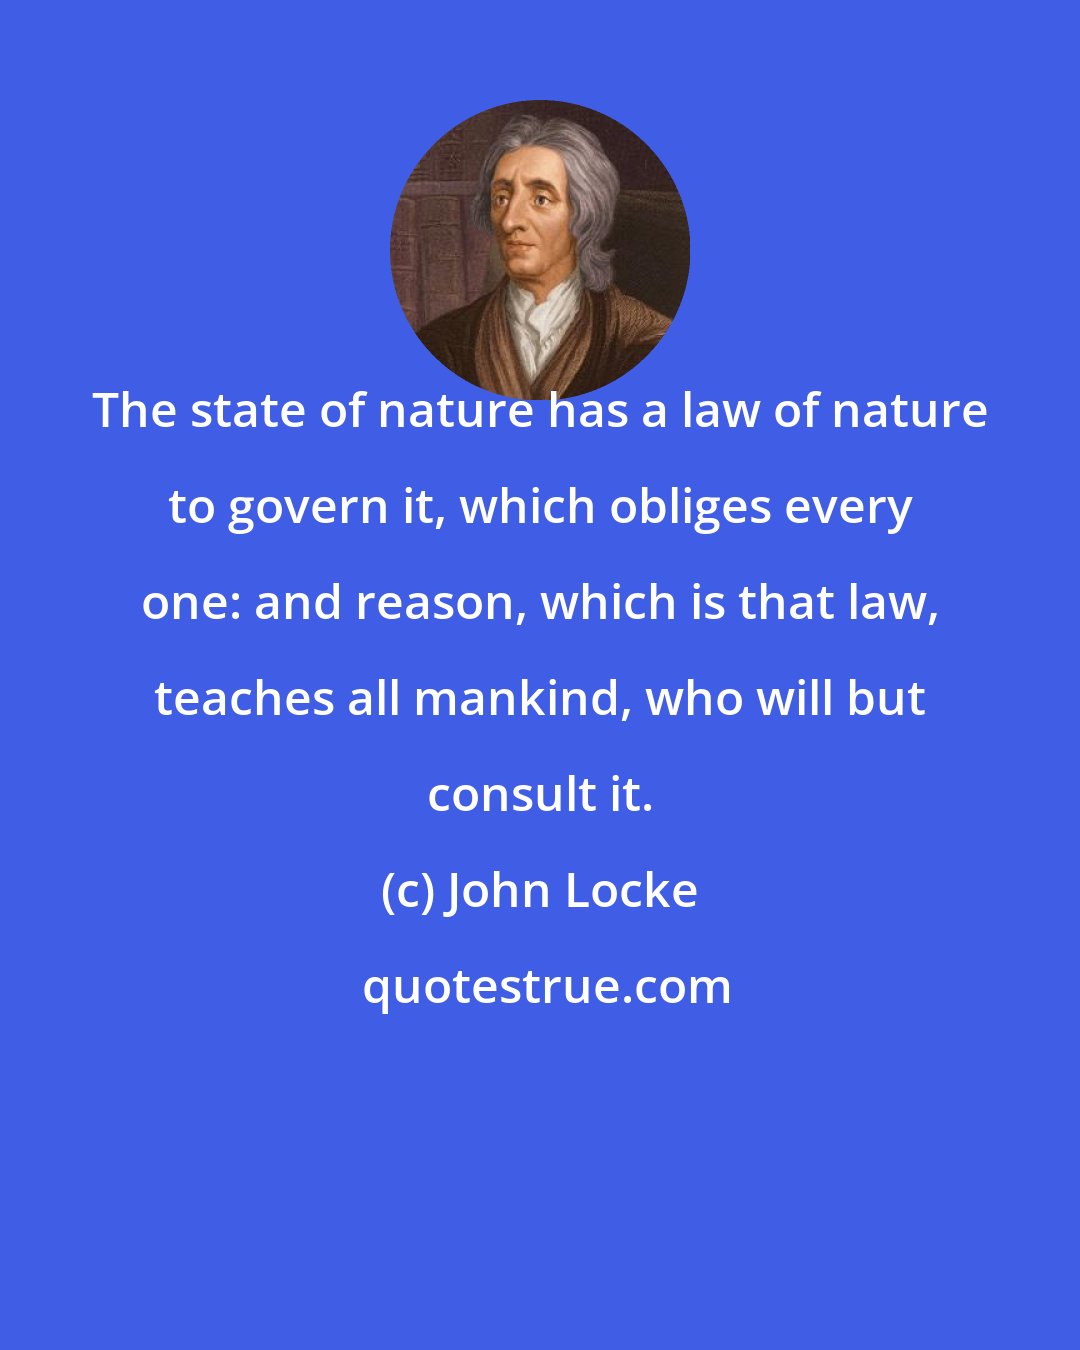 John Locke: The state of nature has a law of nature to govern it, which obliges every one: and reason, which is that law, teaches all mankind, who will but consult it.